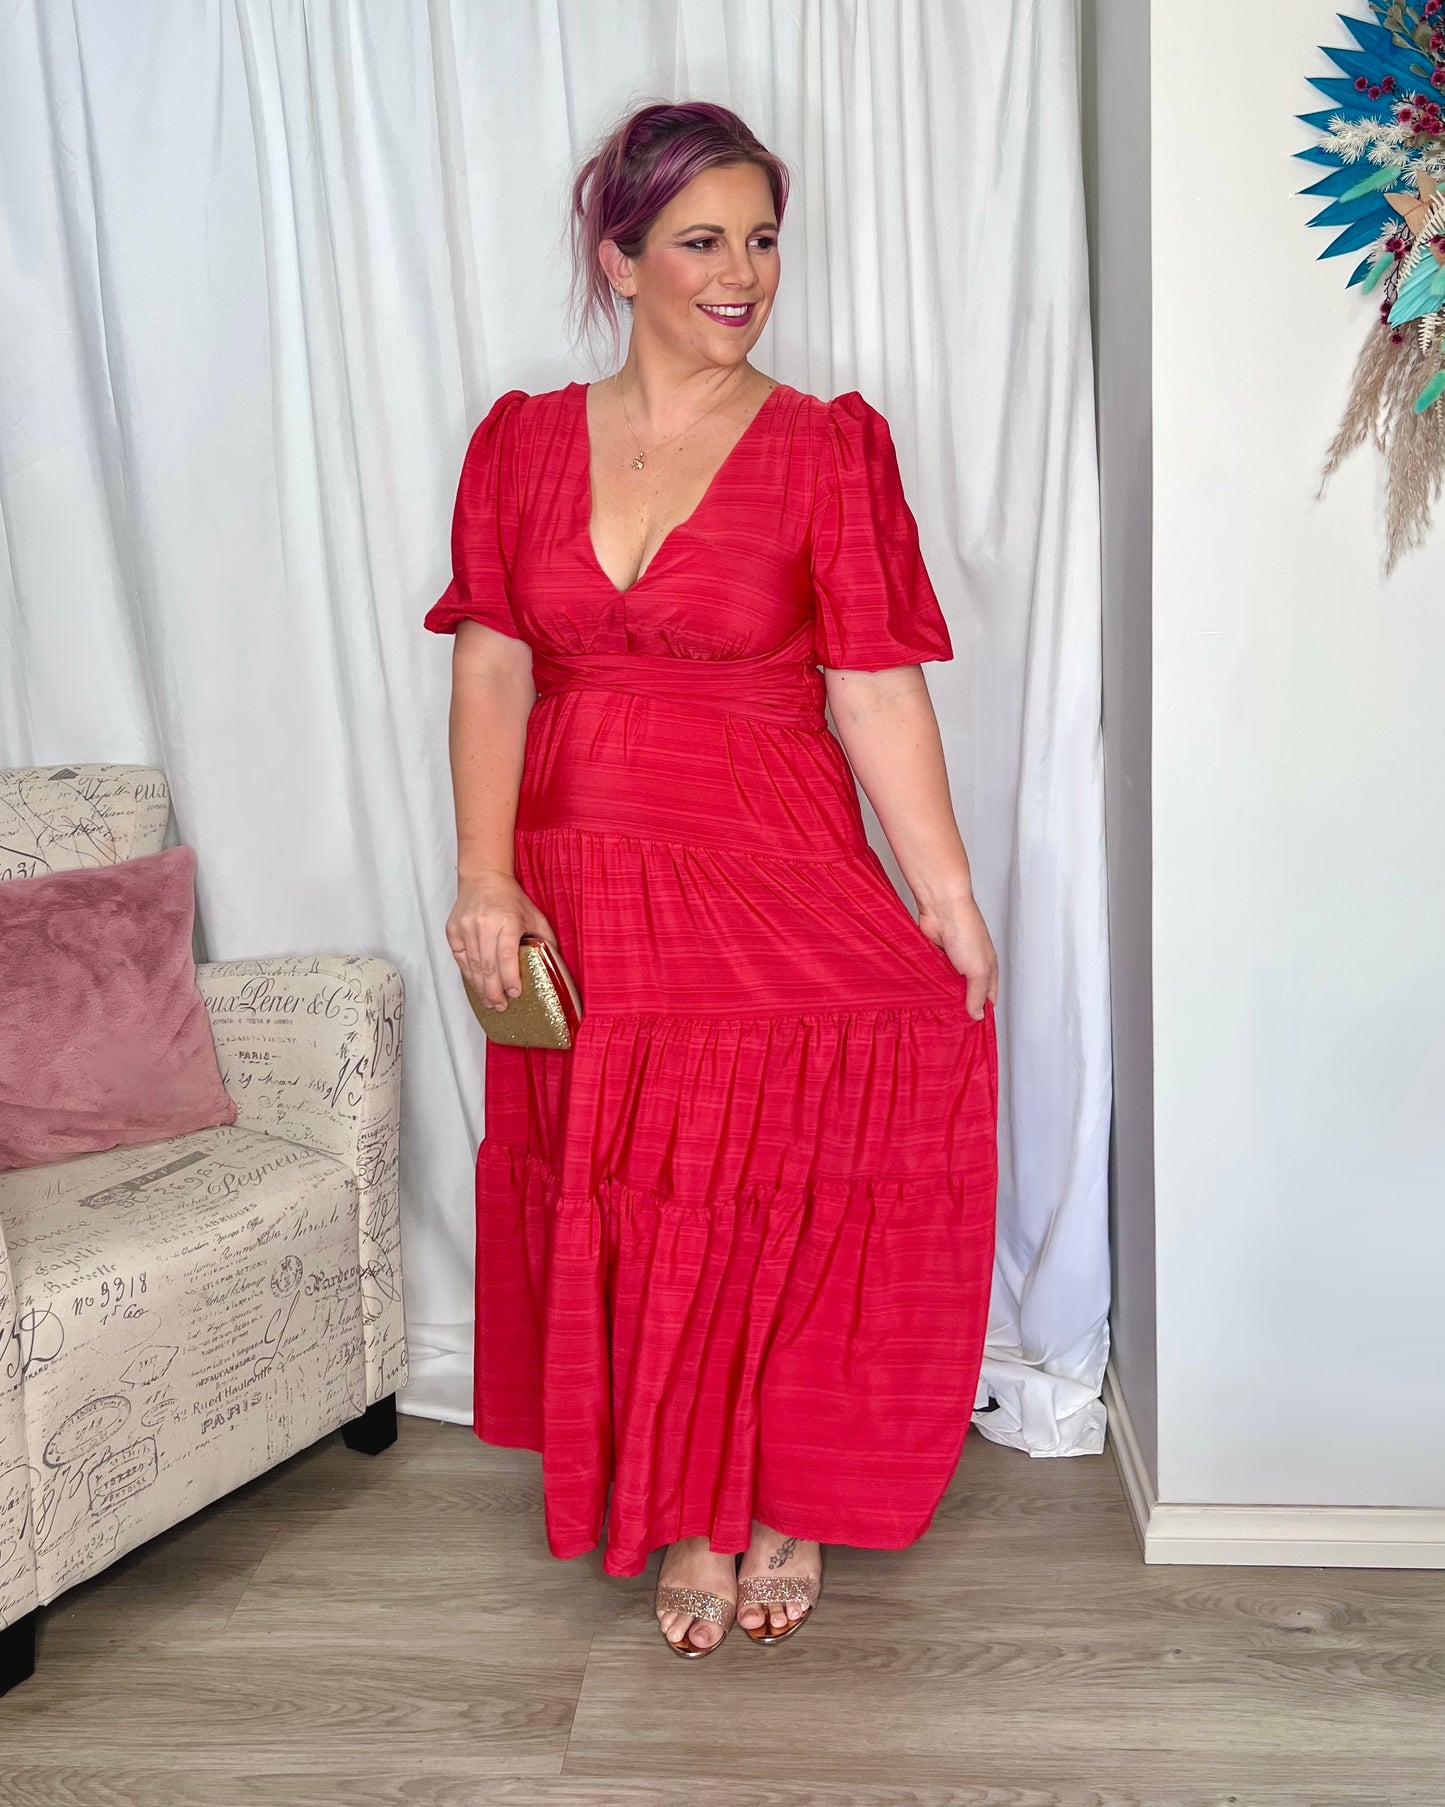 Natalia Crossover Dress: The Natalia Dress is ready for your next cocktail event. It is a long midi dress with a full tiered skirt with plenty of swish. The bodice is a low V cut, with a hoo - Ciao Bella Dresses 